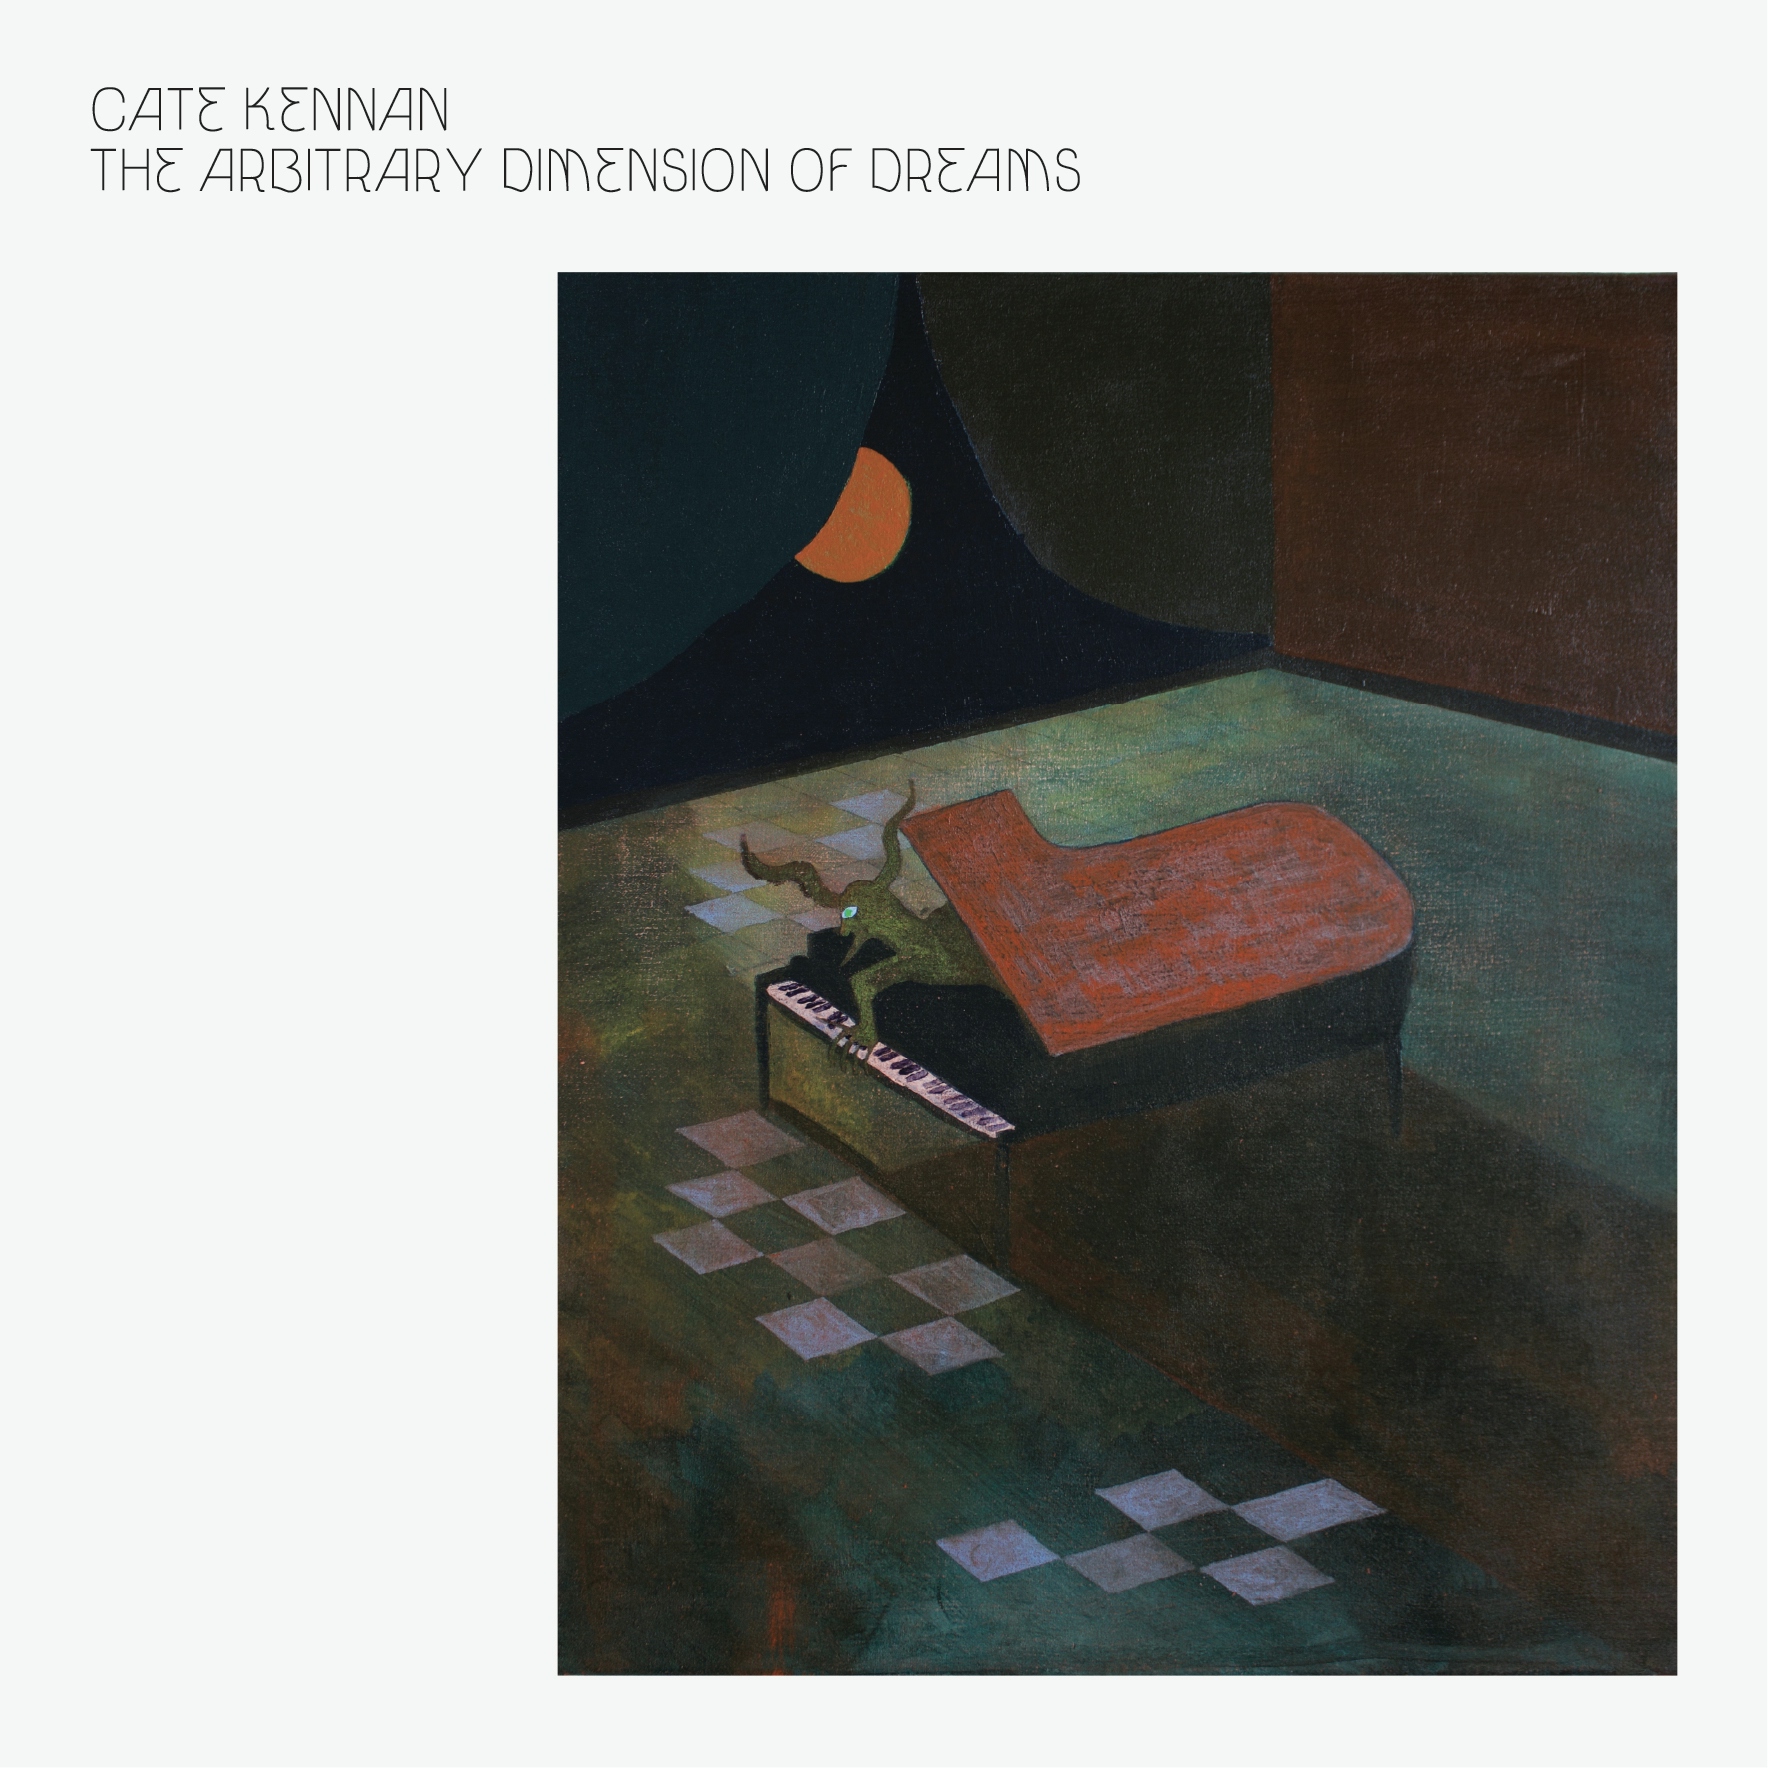 Album artwork for Album artwork for The Arbitrary Dimension of Dreams by Cate Kennan by The Arbitrary Dimension of Dreams - Cate Kennan